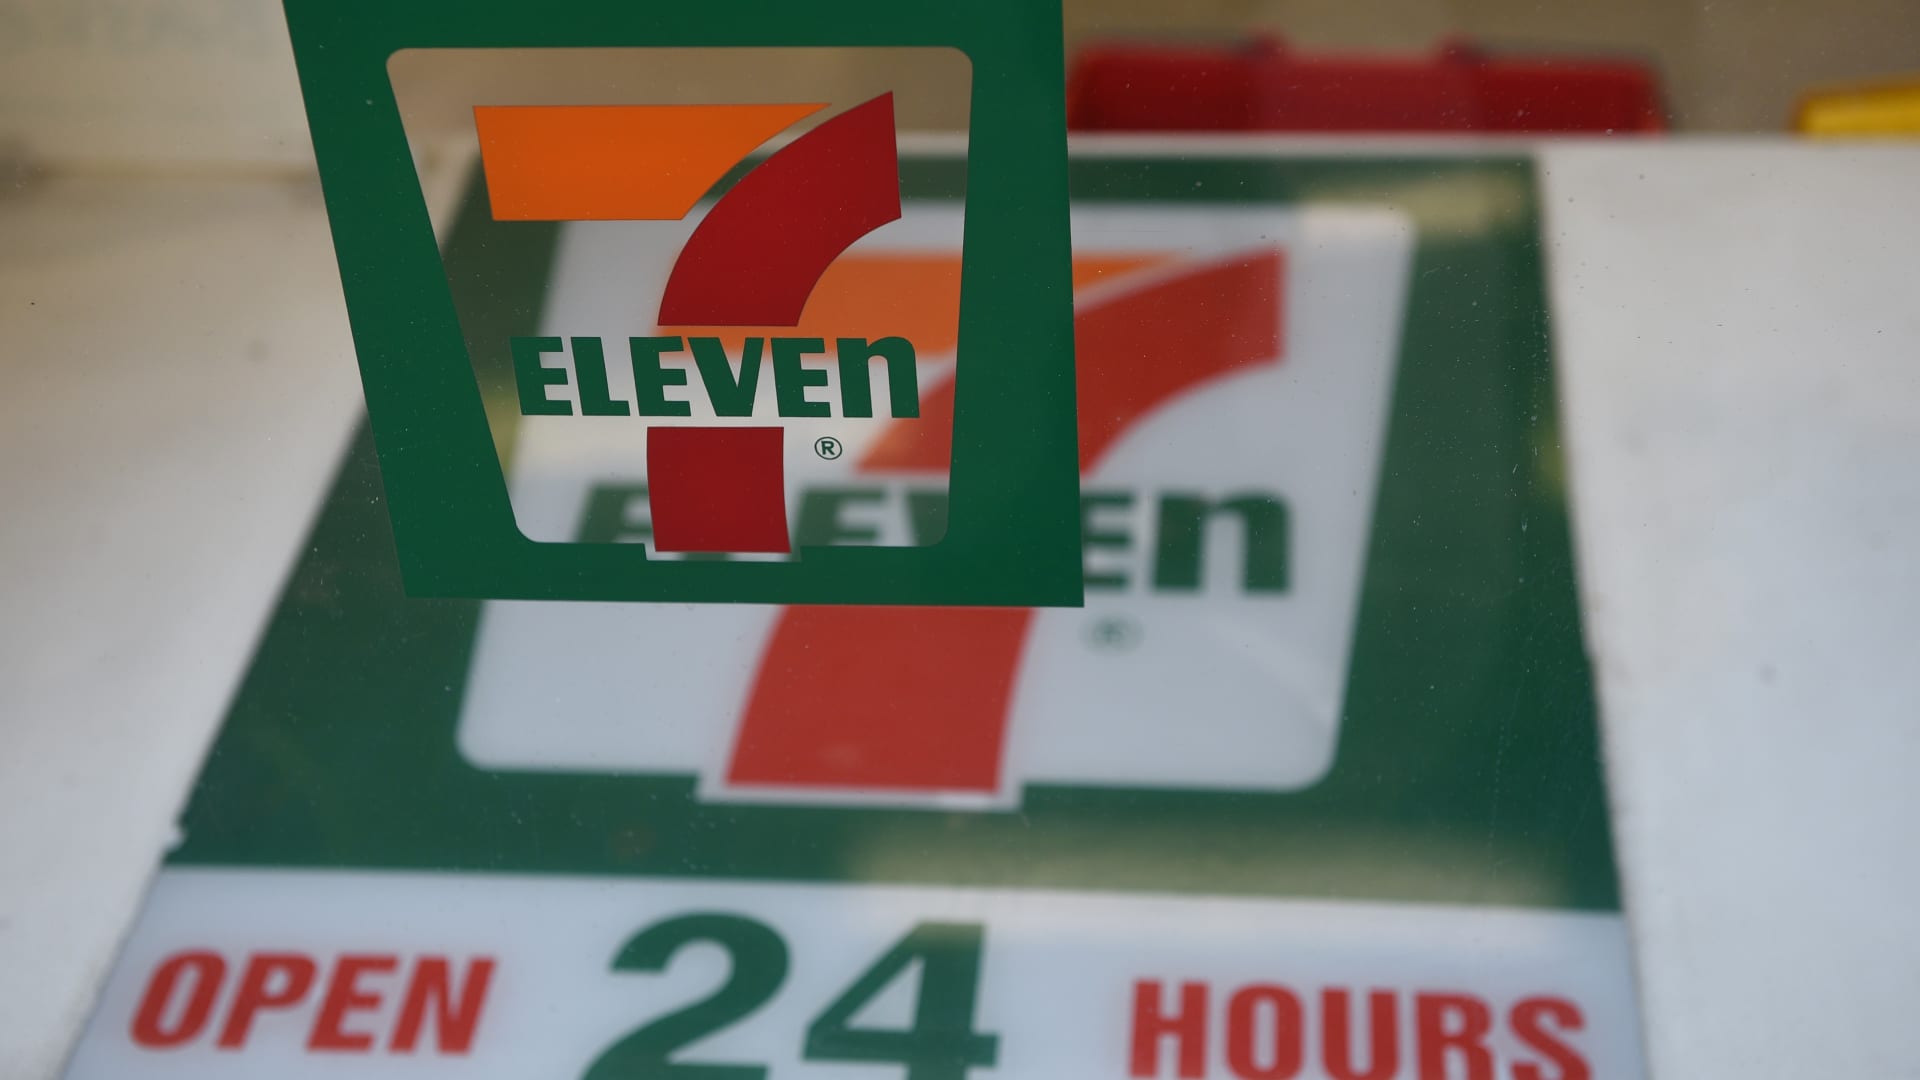 7-Eleven cuts 880 jobs as part of restructuring